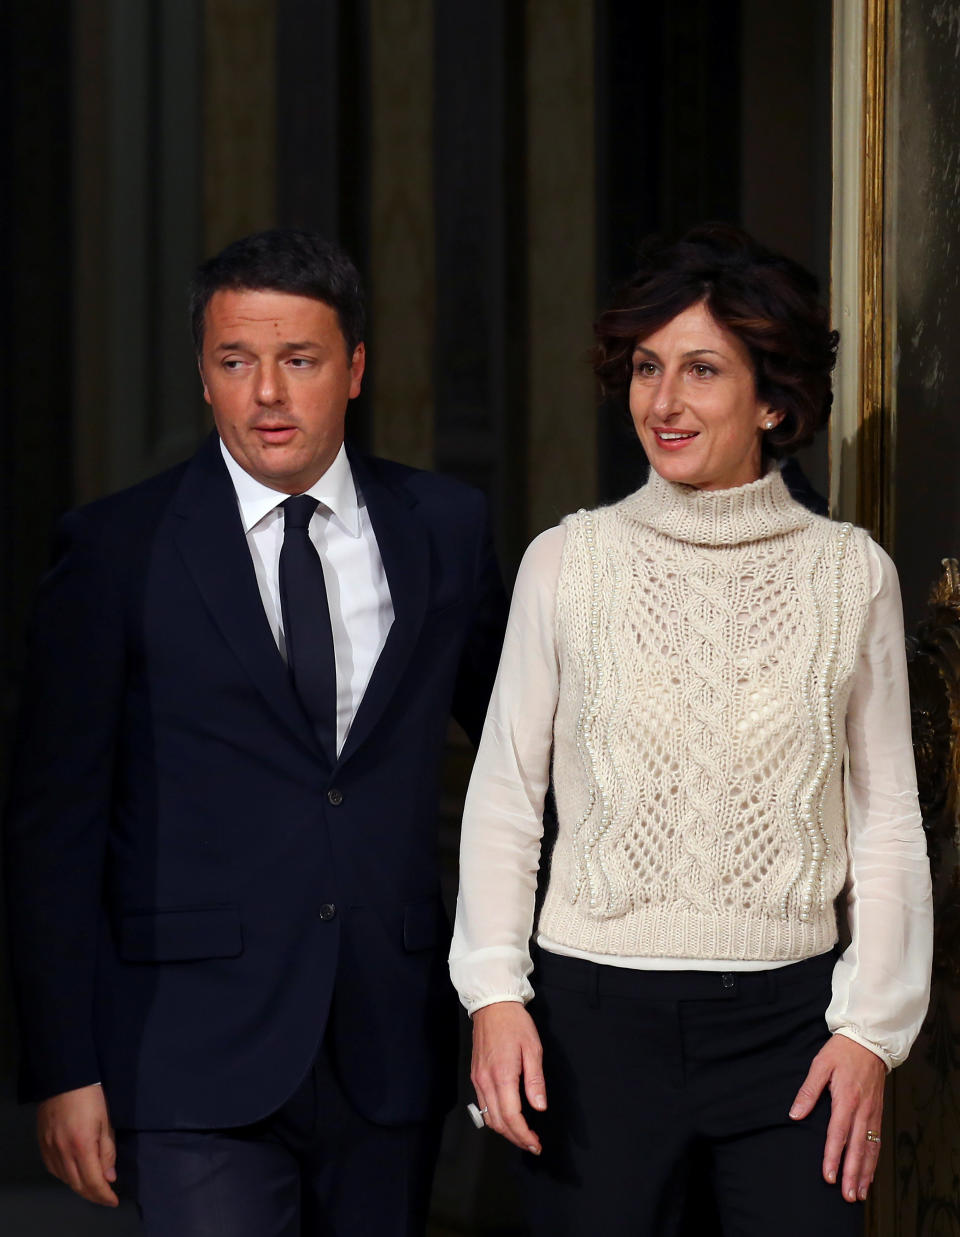 Italian Prime Minister Matteo Renzi arrives with his wife Agnese before a media conference after a referendum on constitutional reform at Chigi palace in Rome, Italy, December 5, 2016. REUTERS/Alessandro Bianchi